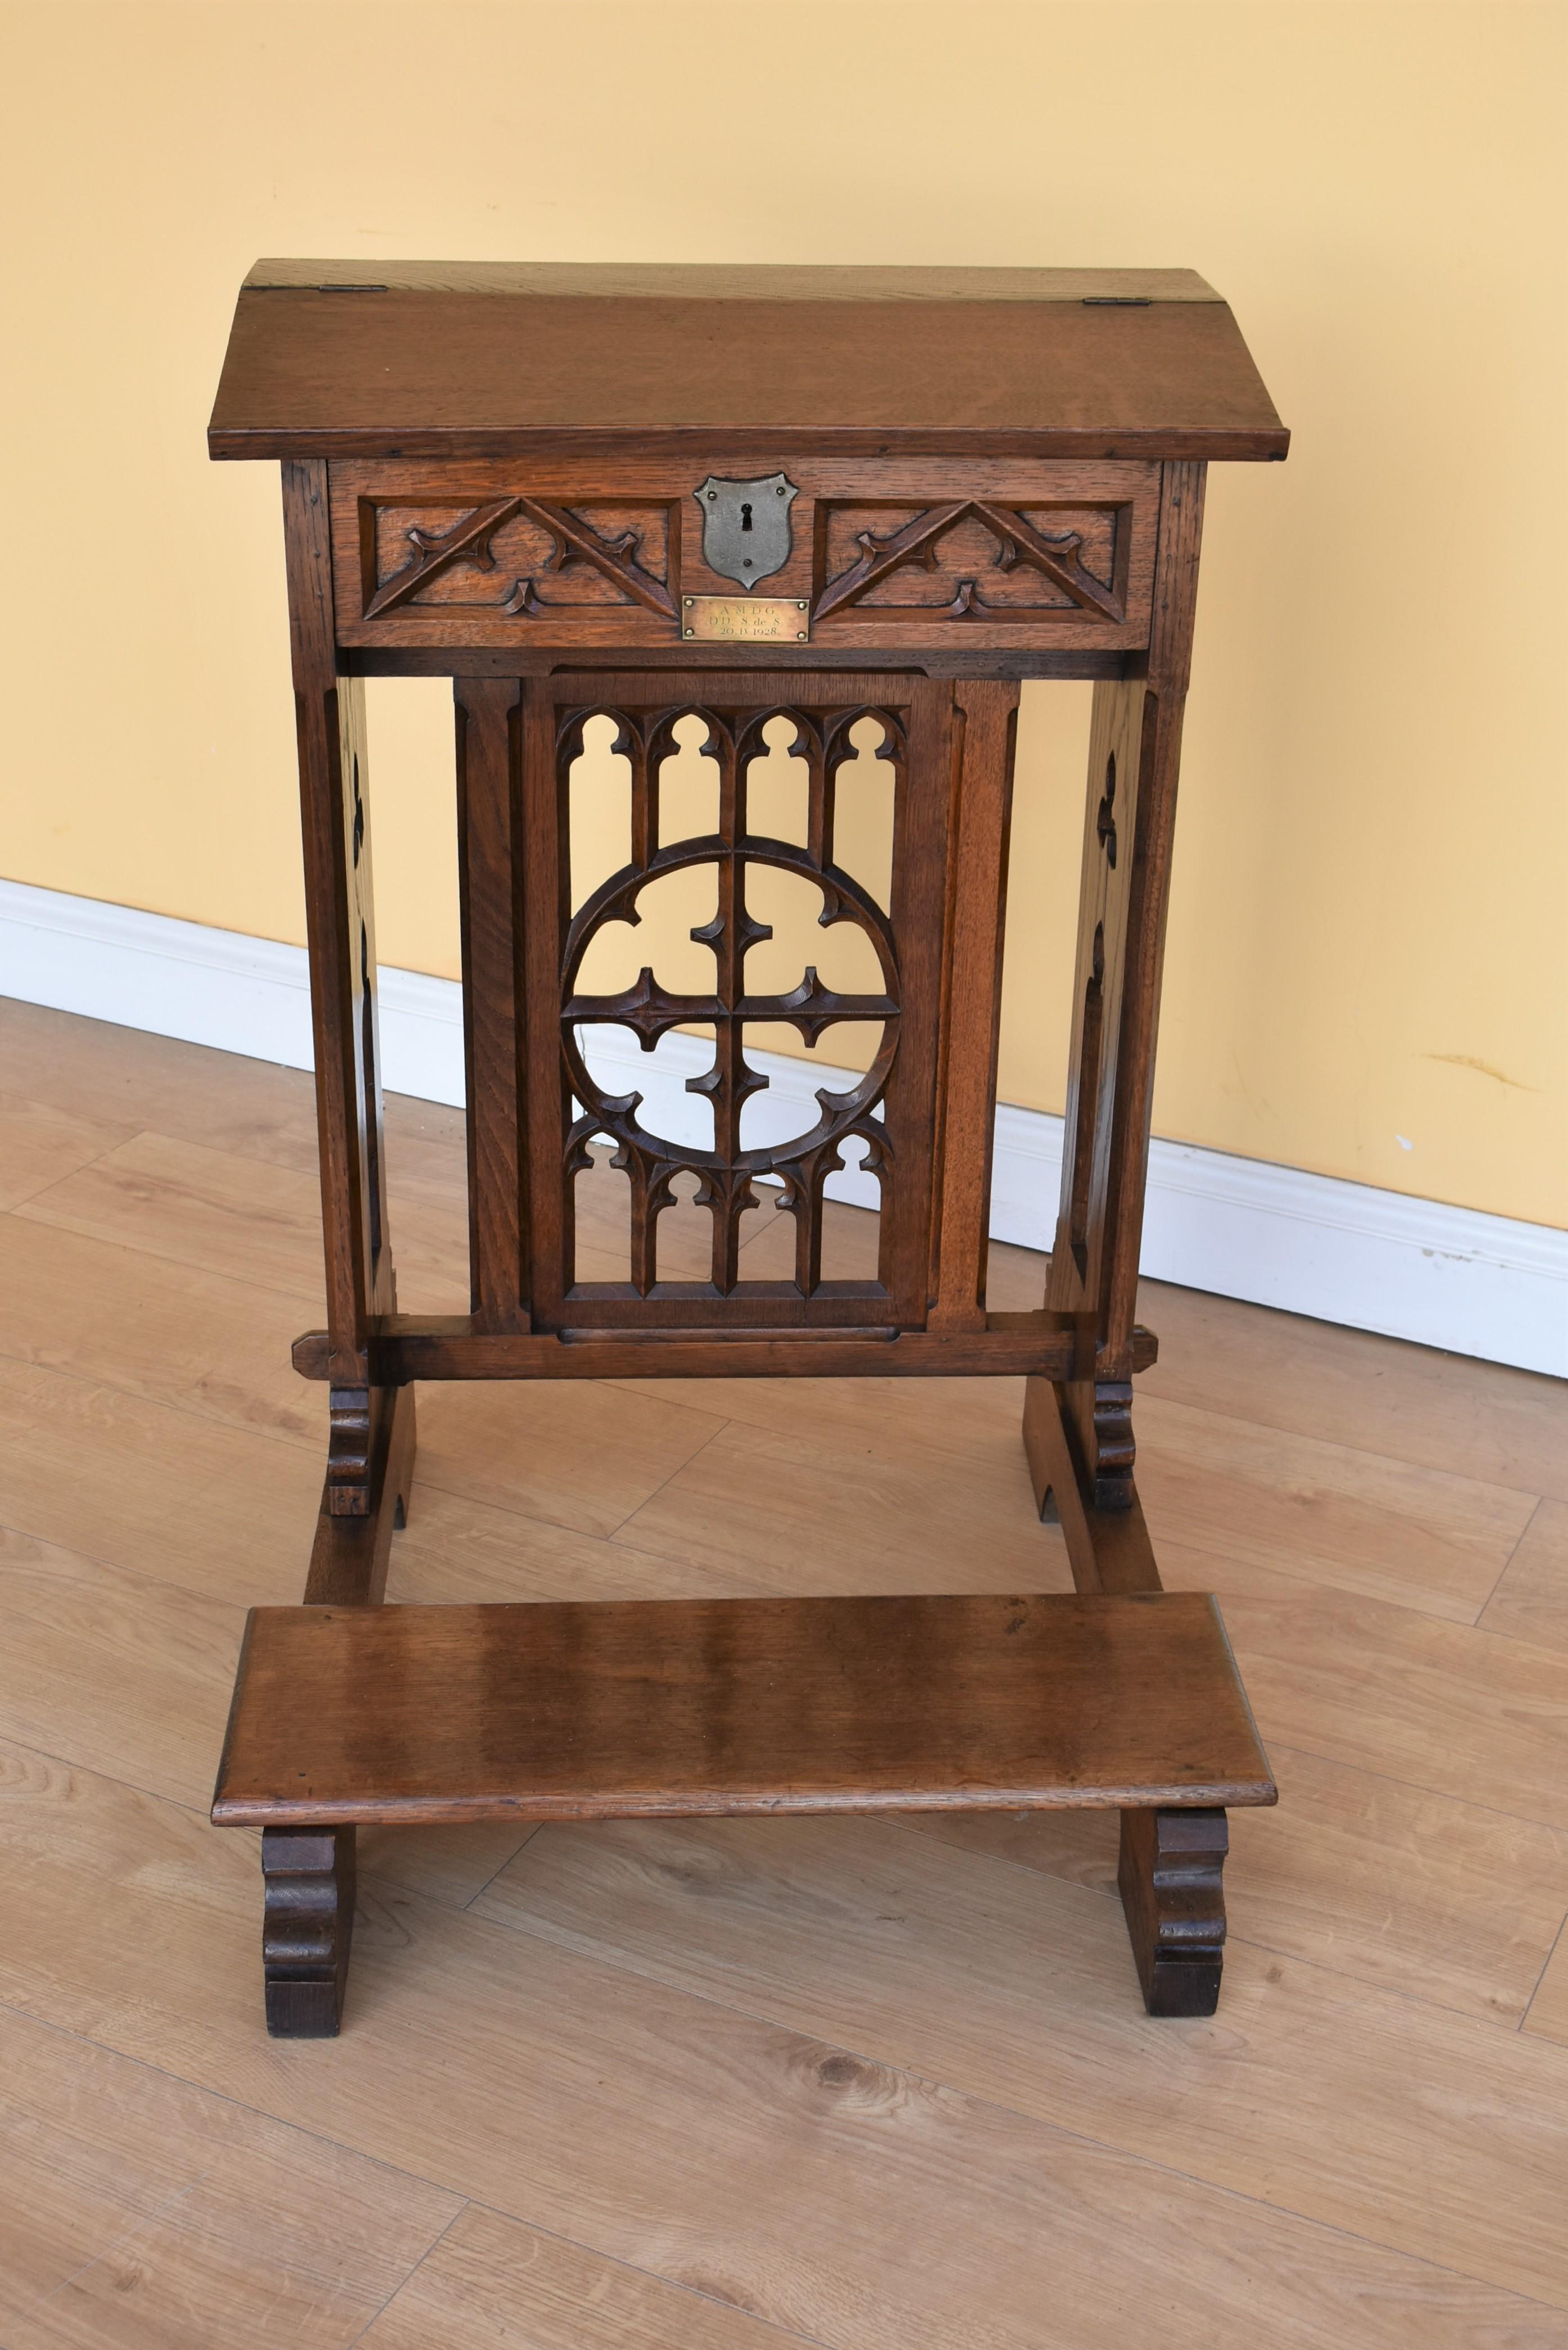 19th century Victorian oak praying lectern-reading stand with pierced ecclesiastical carved upright with hinged slope and kneeling platform. There is a brass date plaque for 1928 which I believe to have been added later.